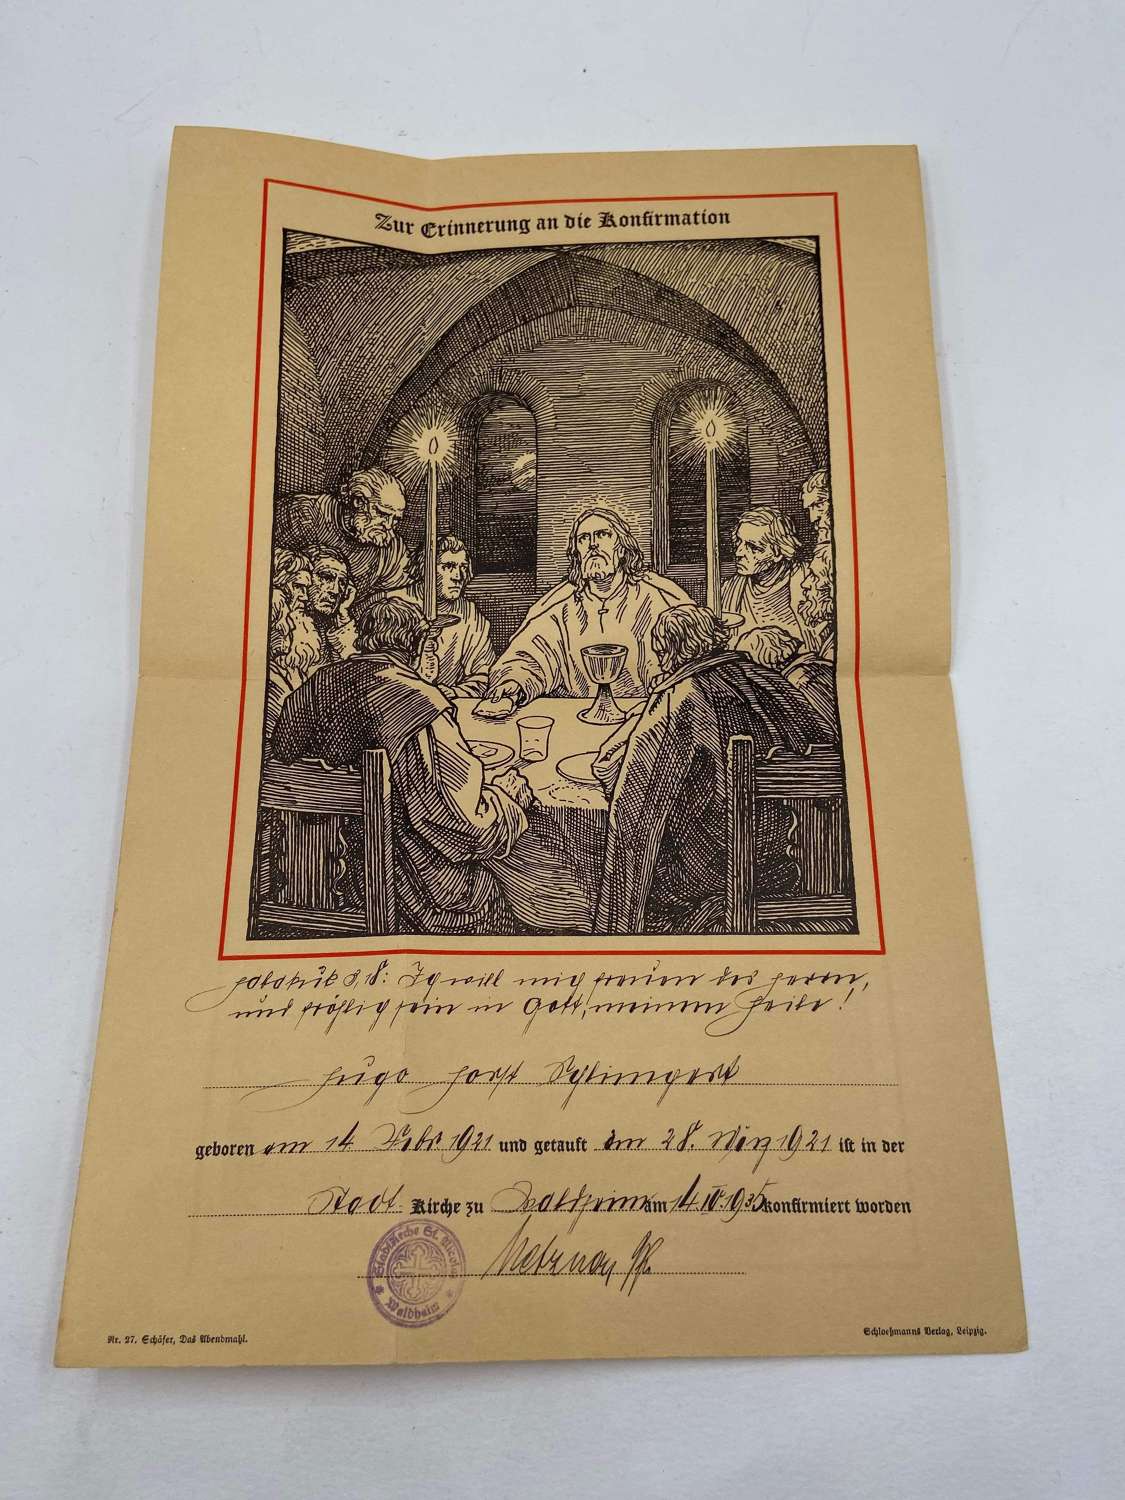 WW1 German 1921 Dated Certificate Commemorating The Confirmation